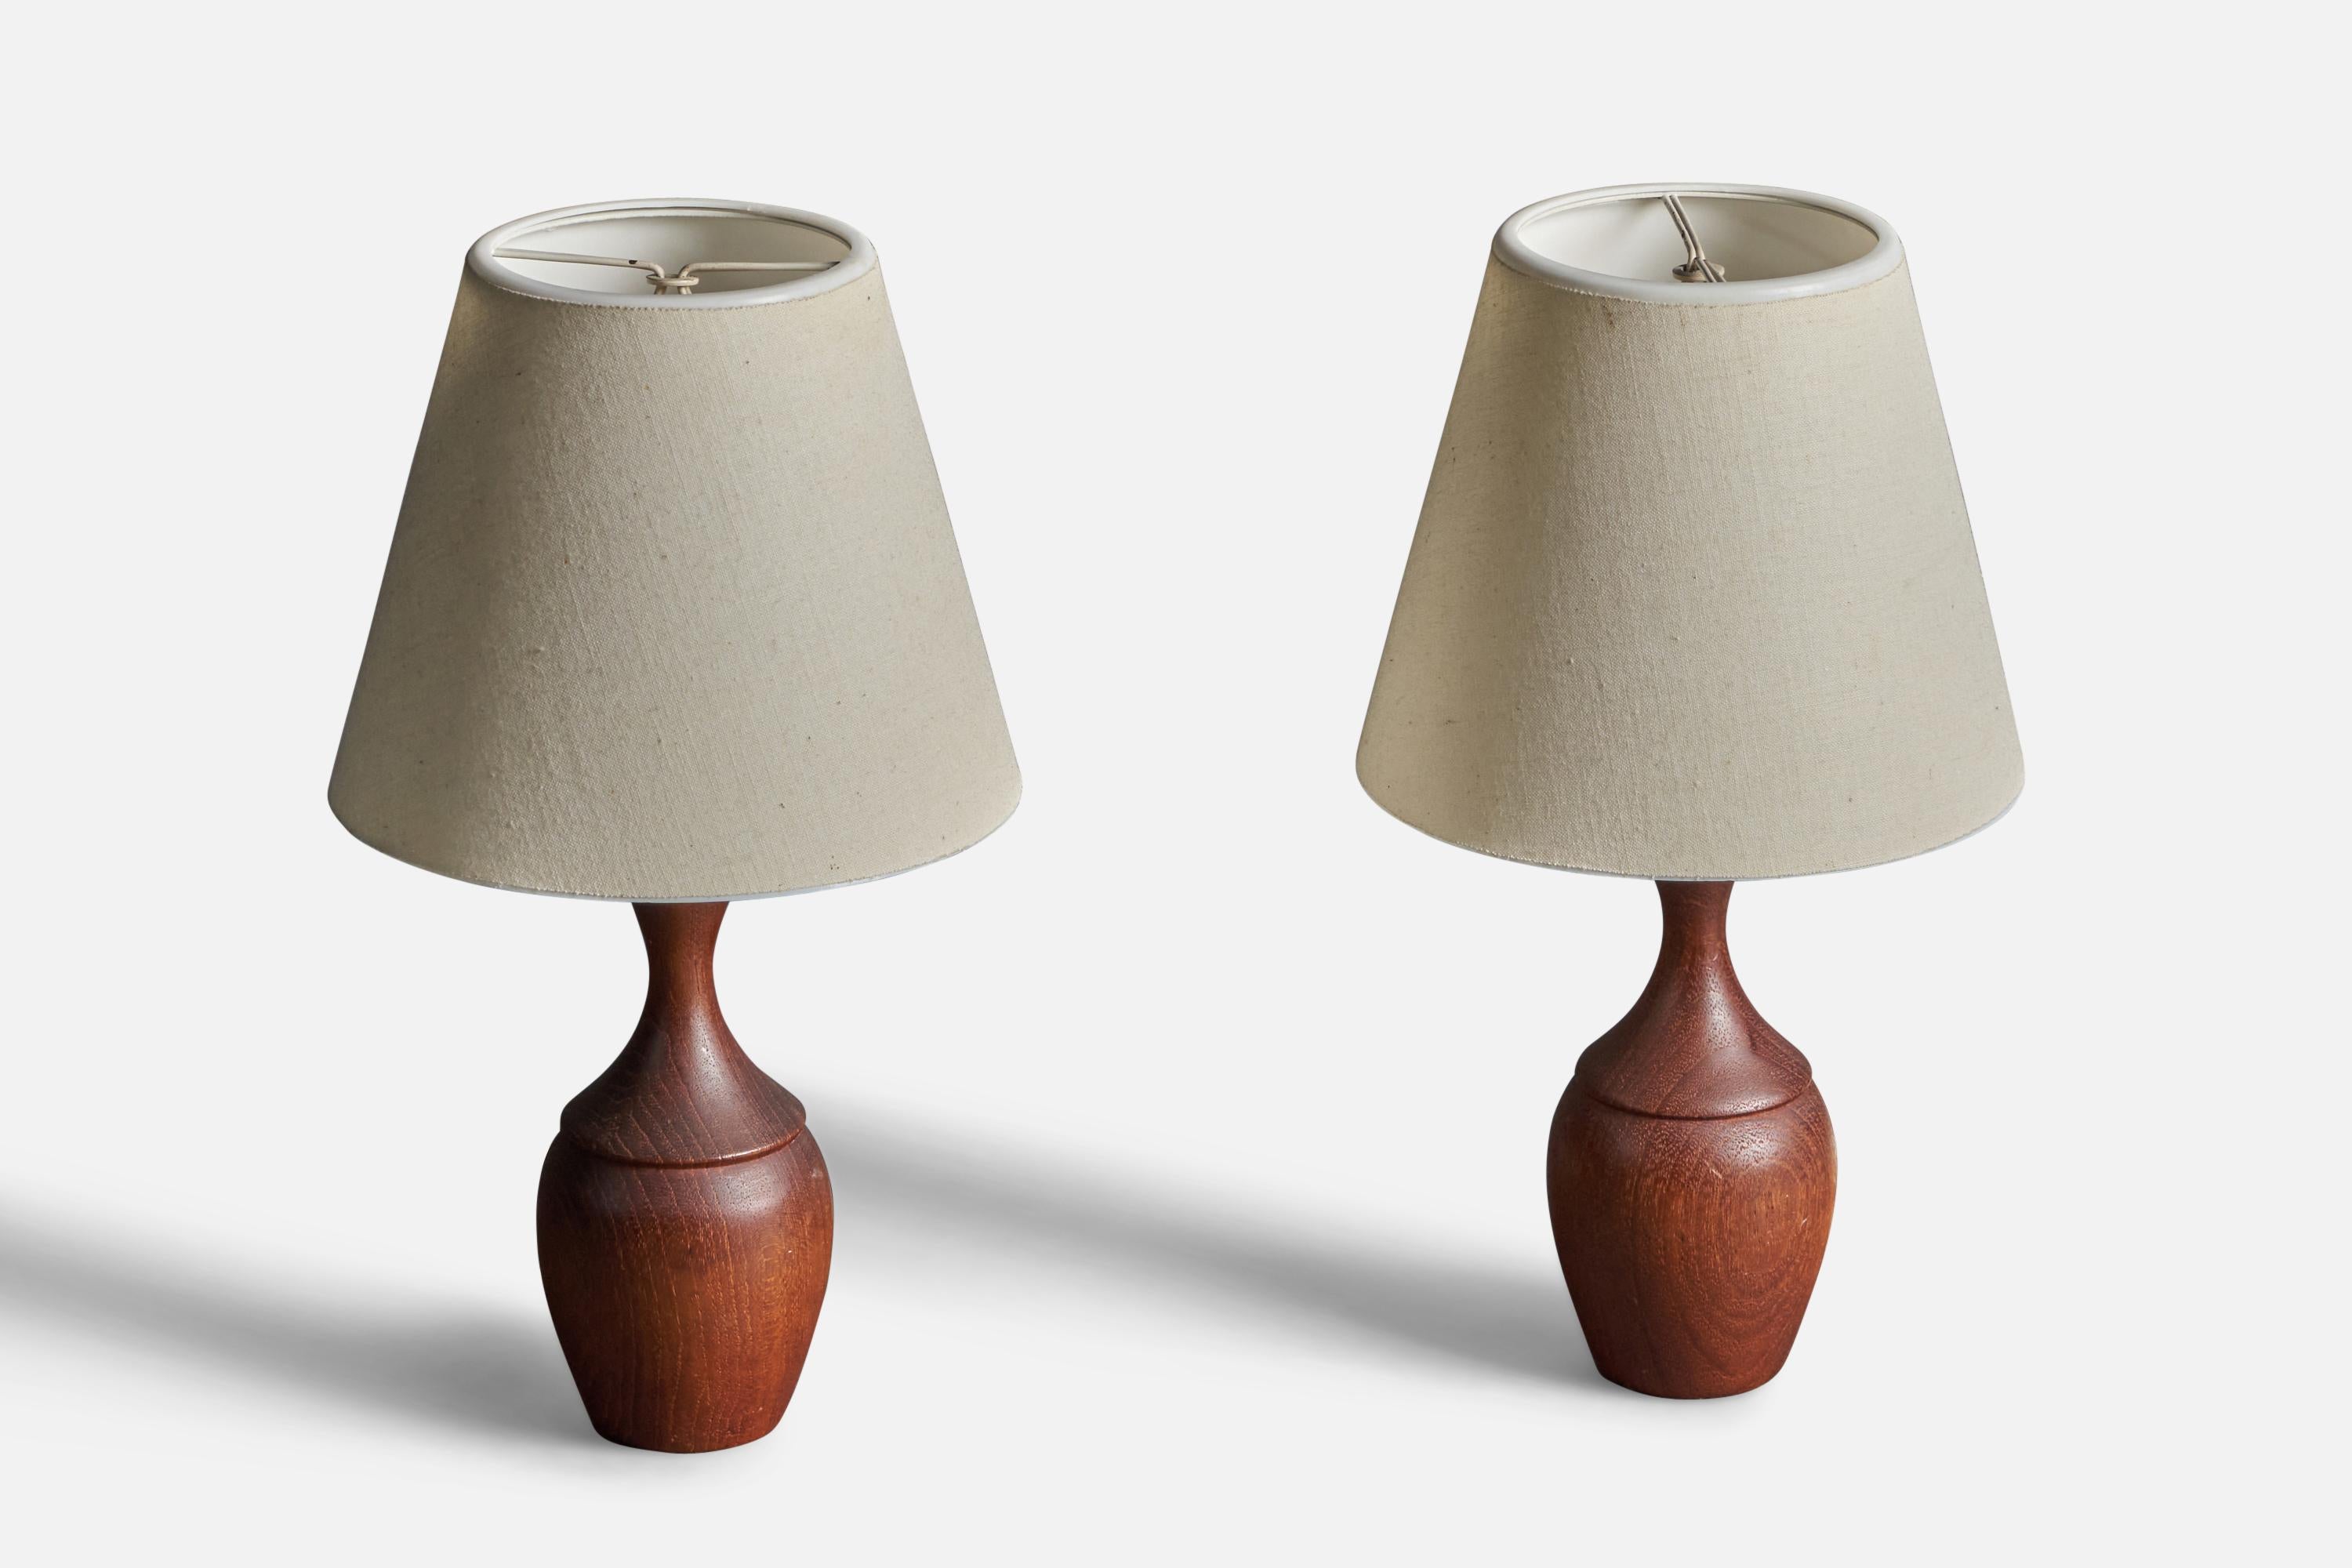 A pair of small organic table lamps. In solid teak. Lampshades not included.

Other designers of the period include Finn Juhl, Hans Wegner, Kaare Klint, Alvar Aalto, and Paavo Tynell.